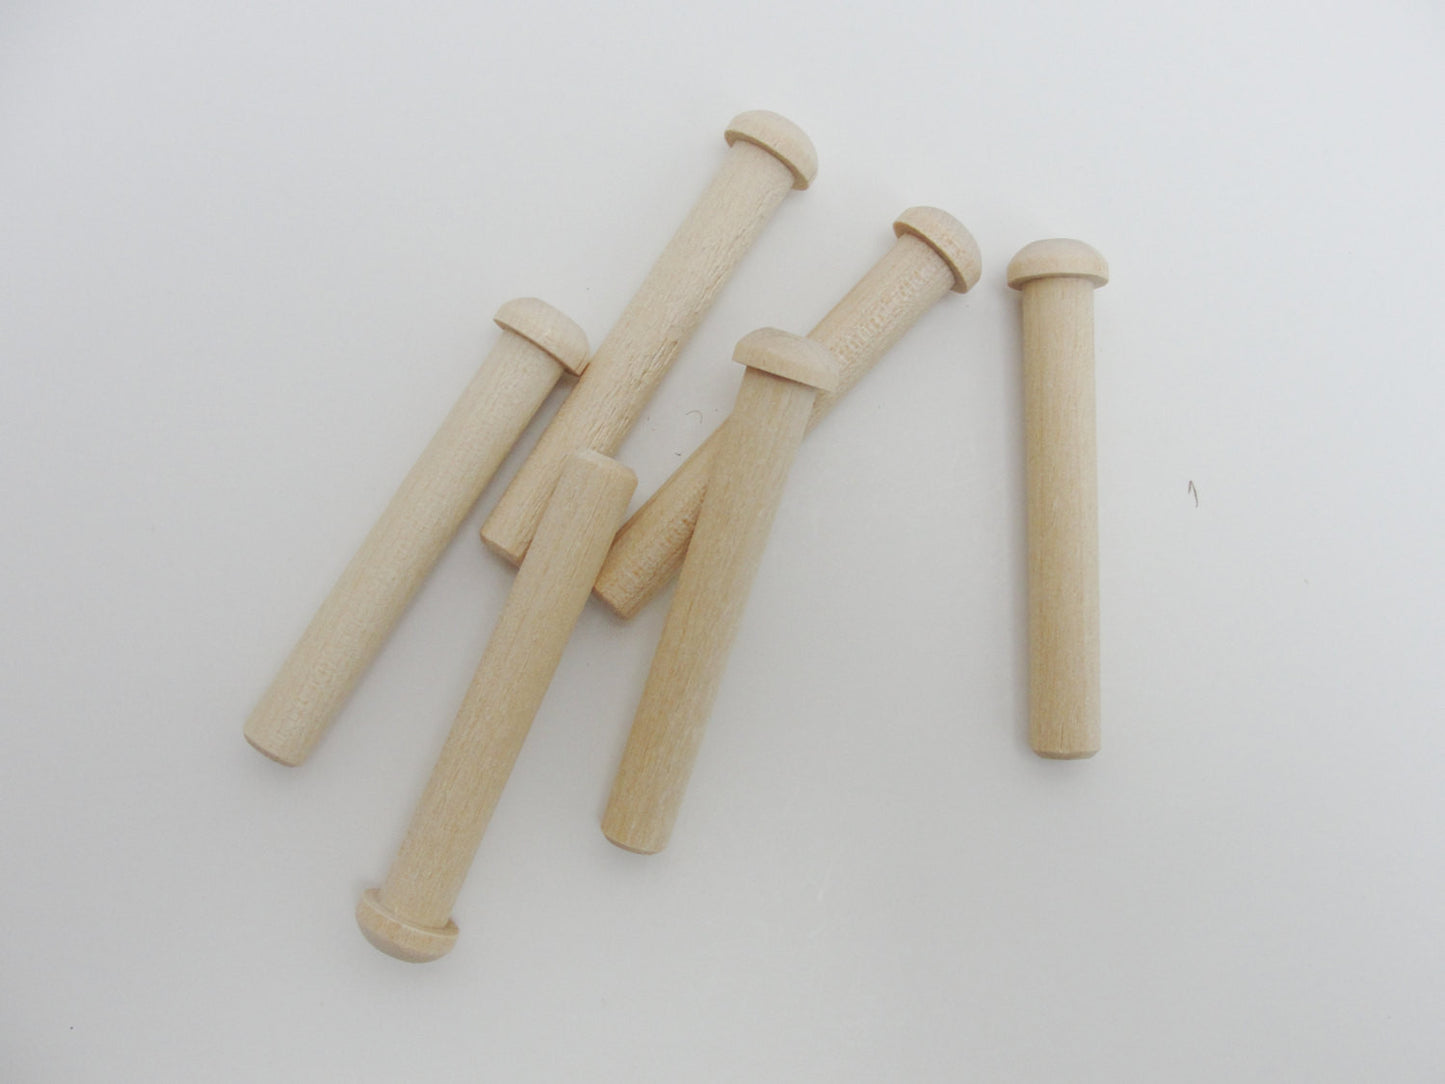 Large wooden toy axle peg set of 6 - Wood parts - Craft Supply House